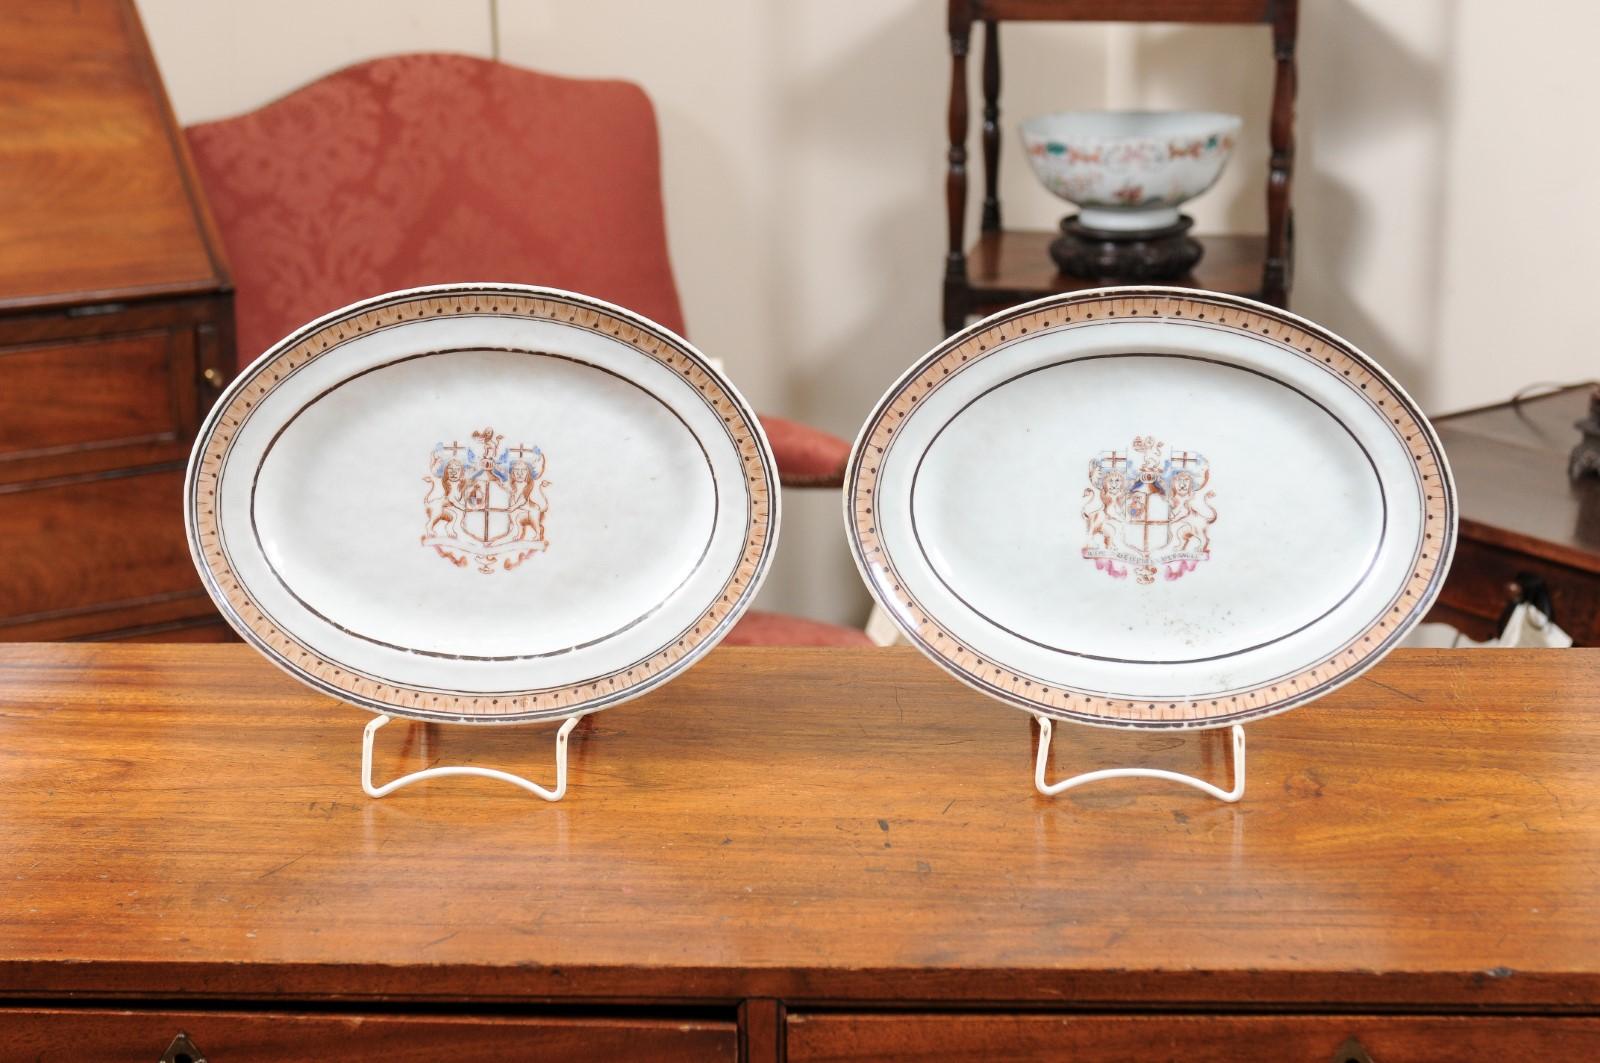 Pair of 18th Century Chinese Export Porcelain Platters with Armorial Crests In Good Condition For Sale In Atlanta, GA